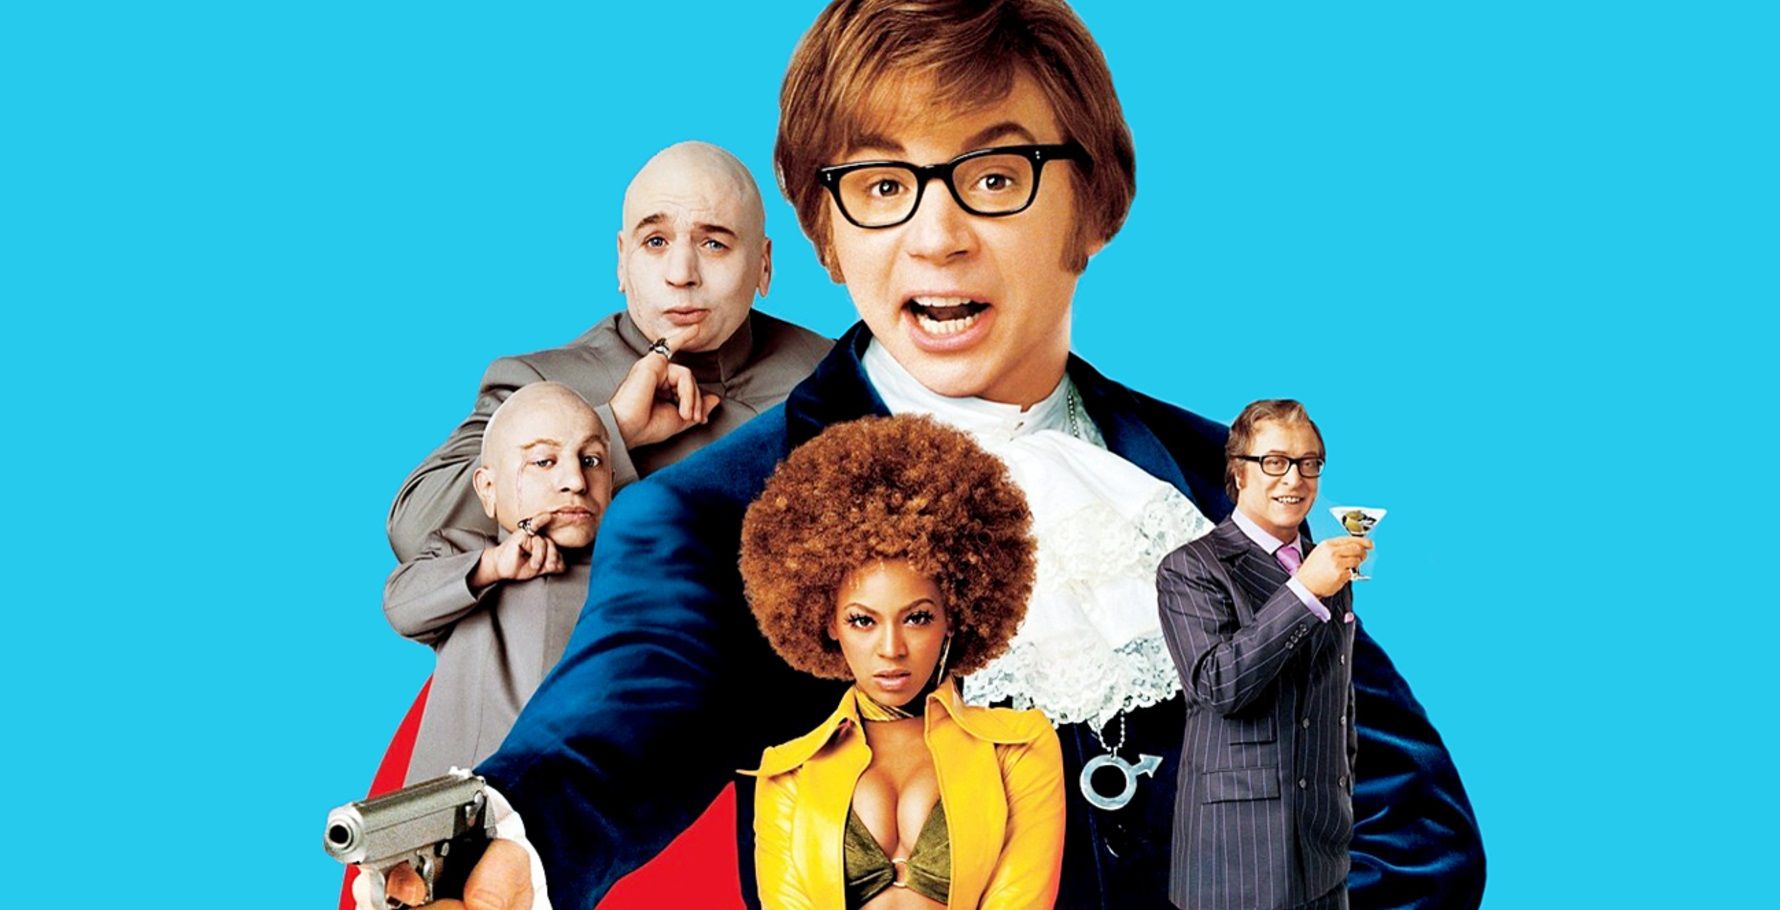 10 Shagadelic BehindTheScenes Stories From The Austin Powers Movies